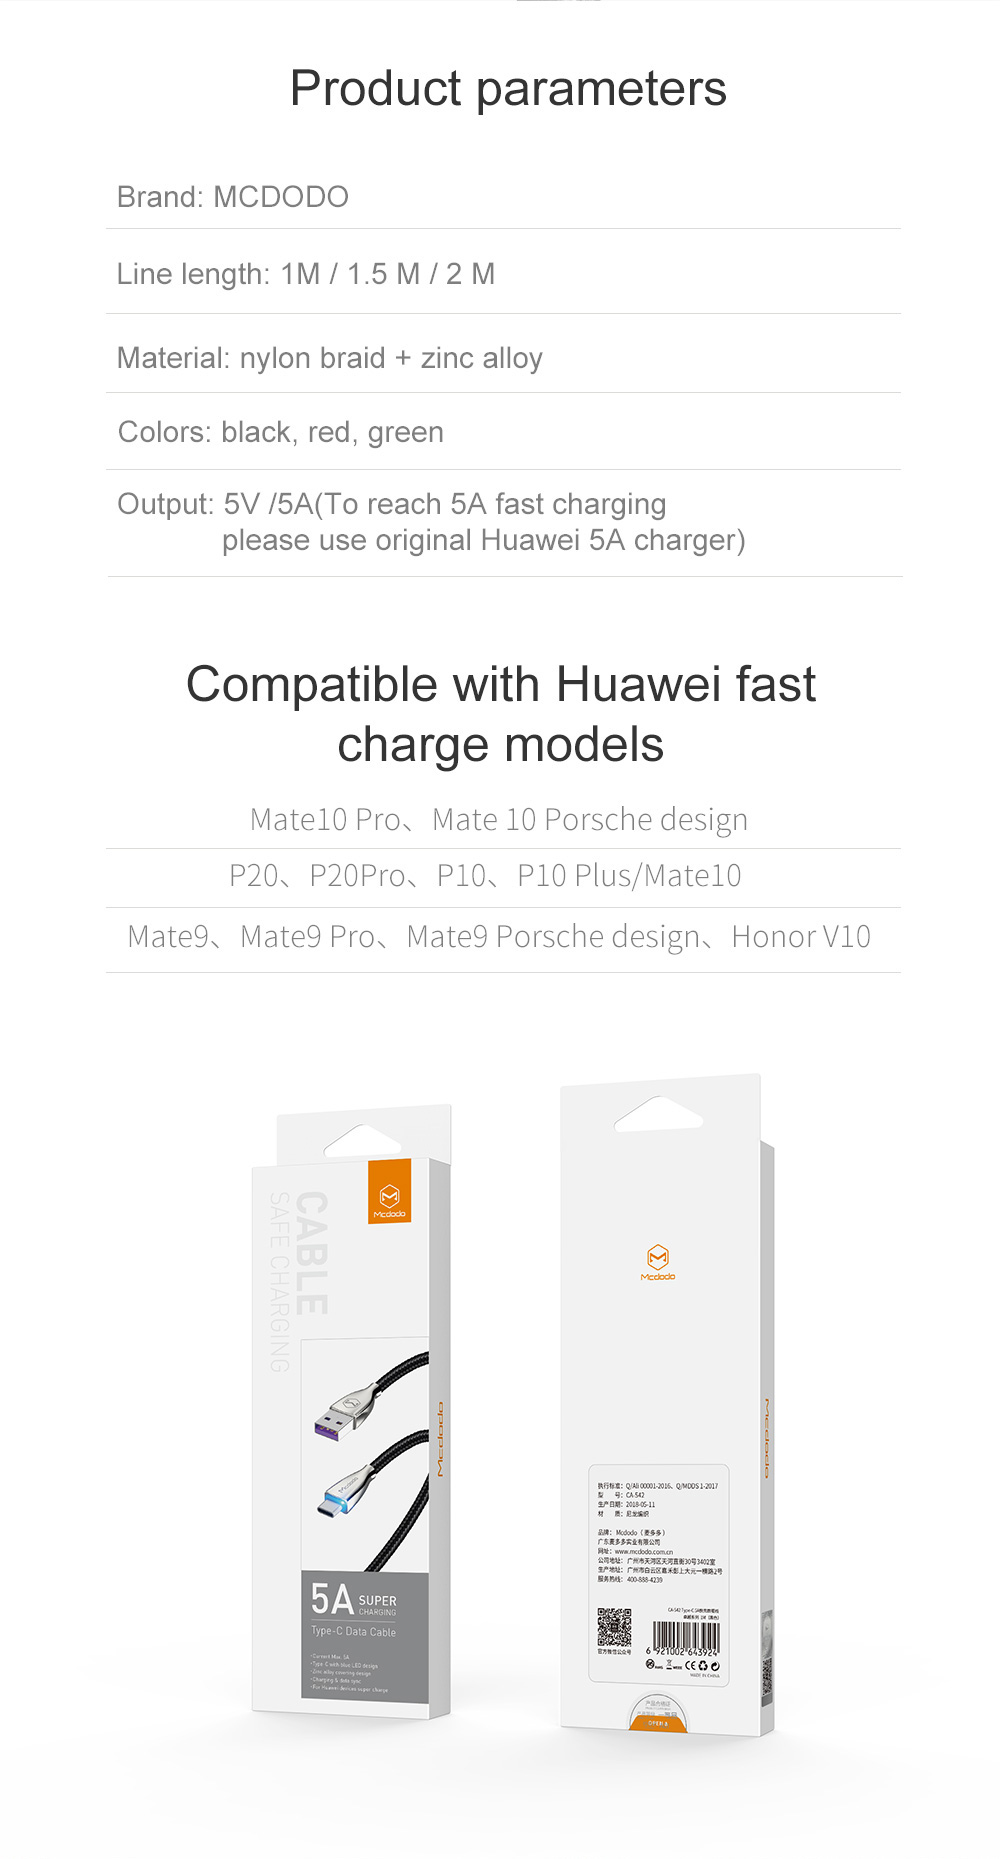 Mcdodo-5A-Type-C-Braided-Fast-Charging-Data-Cable-1M-For-Huawei-Super-Charge-Mate-10-Pro-P20-1332018-11